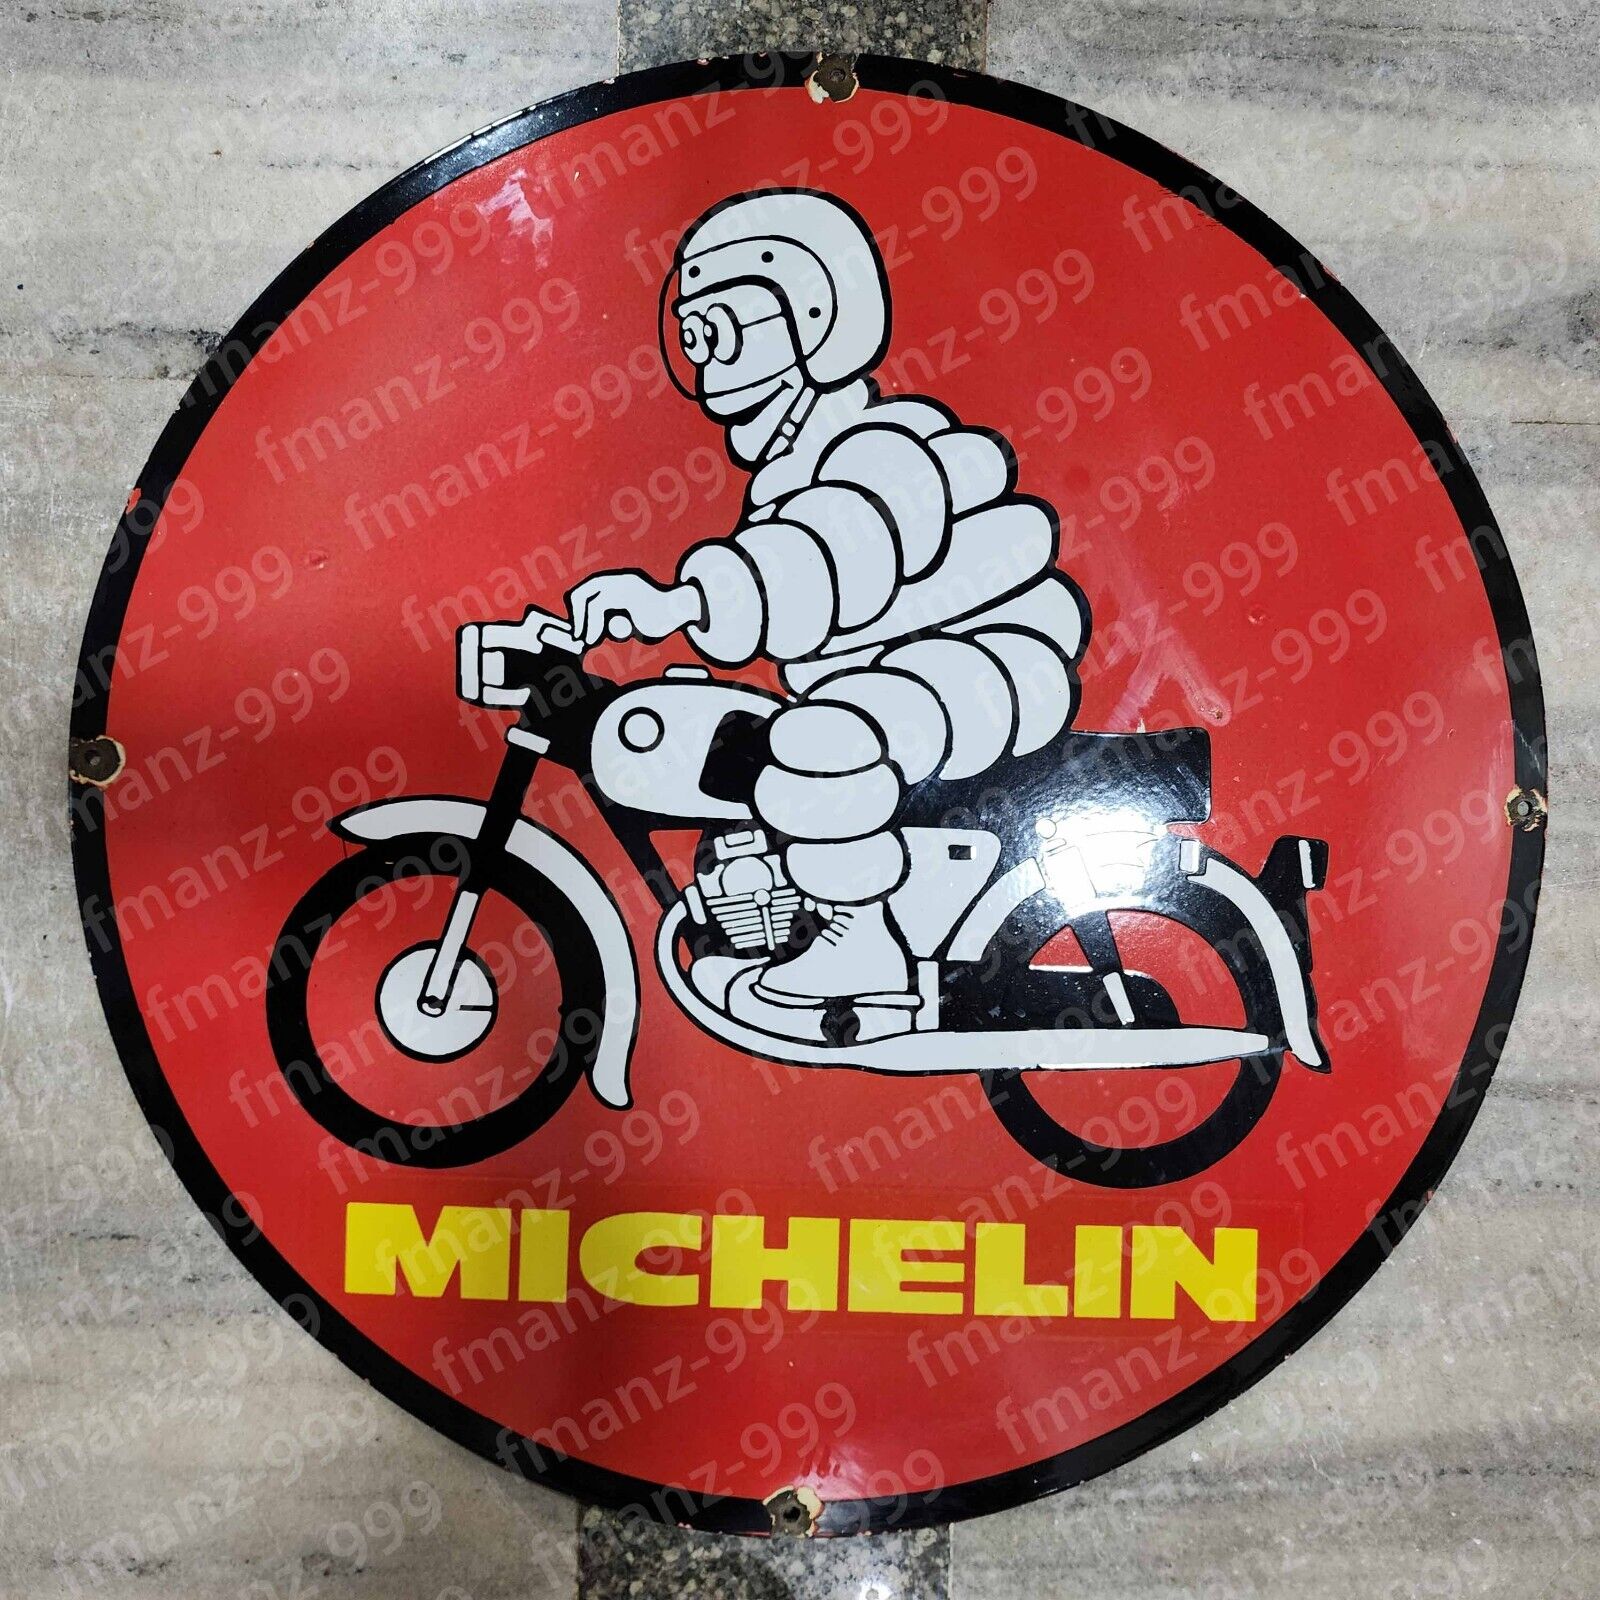 MICHELIN PORCELAIN ENAMEL SIGN 30 INCHES ROUND